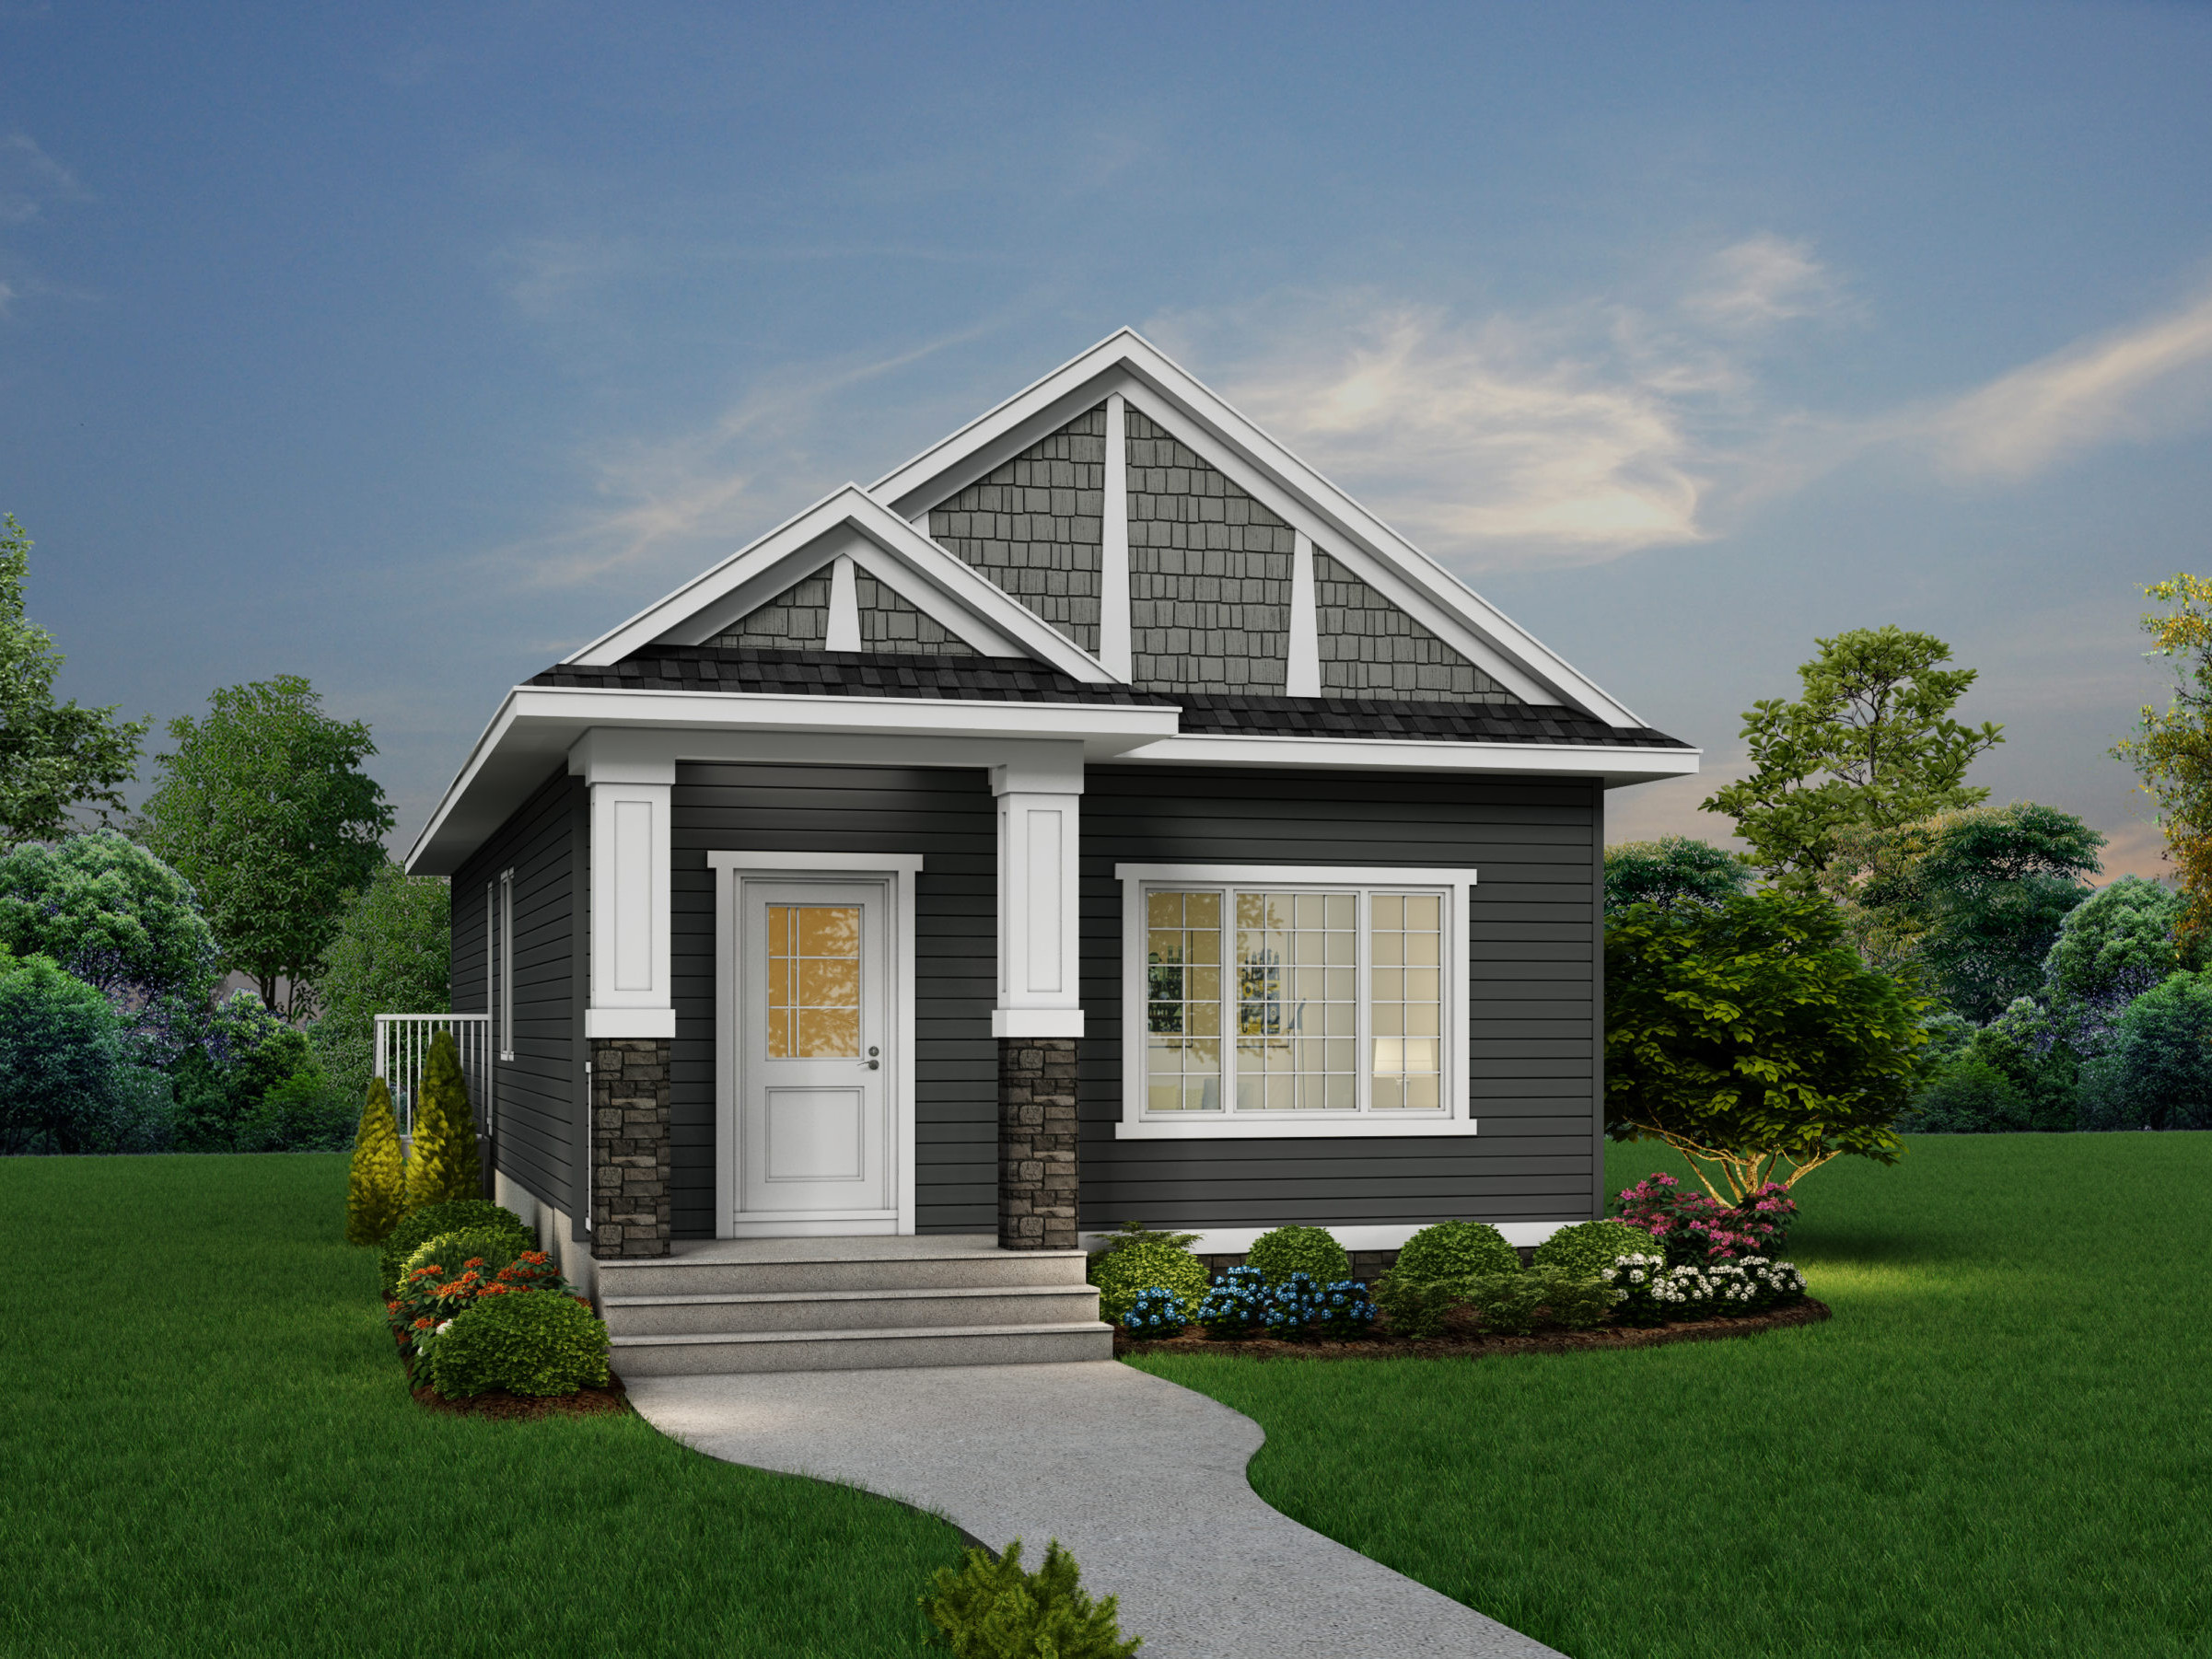 A modern prairie bungalow home with detached garage features white window trim, dark grey siding, including rock accents